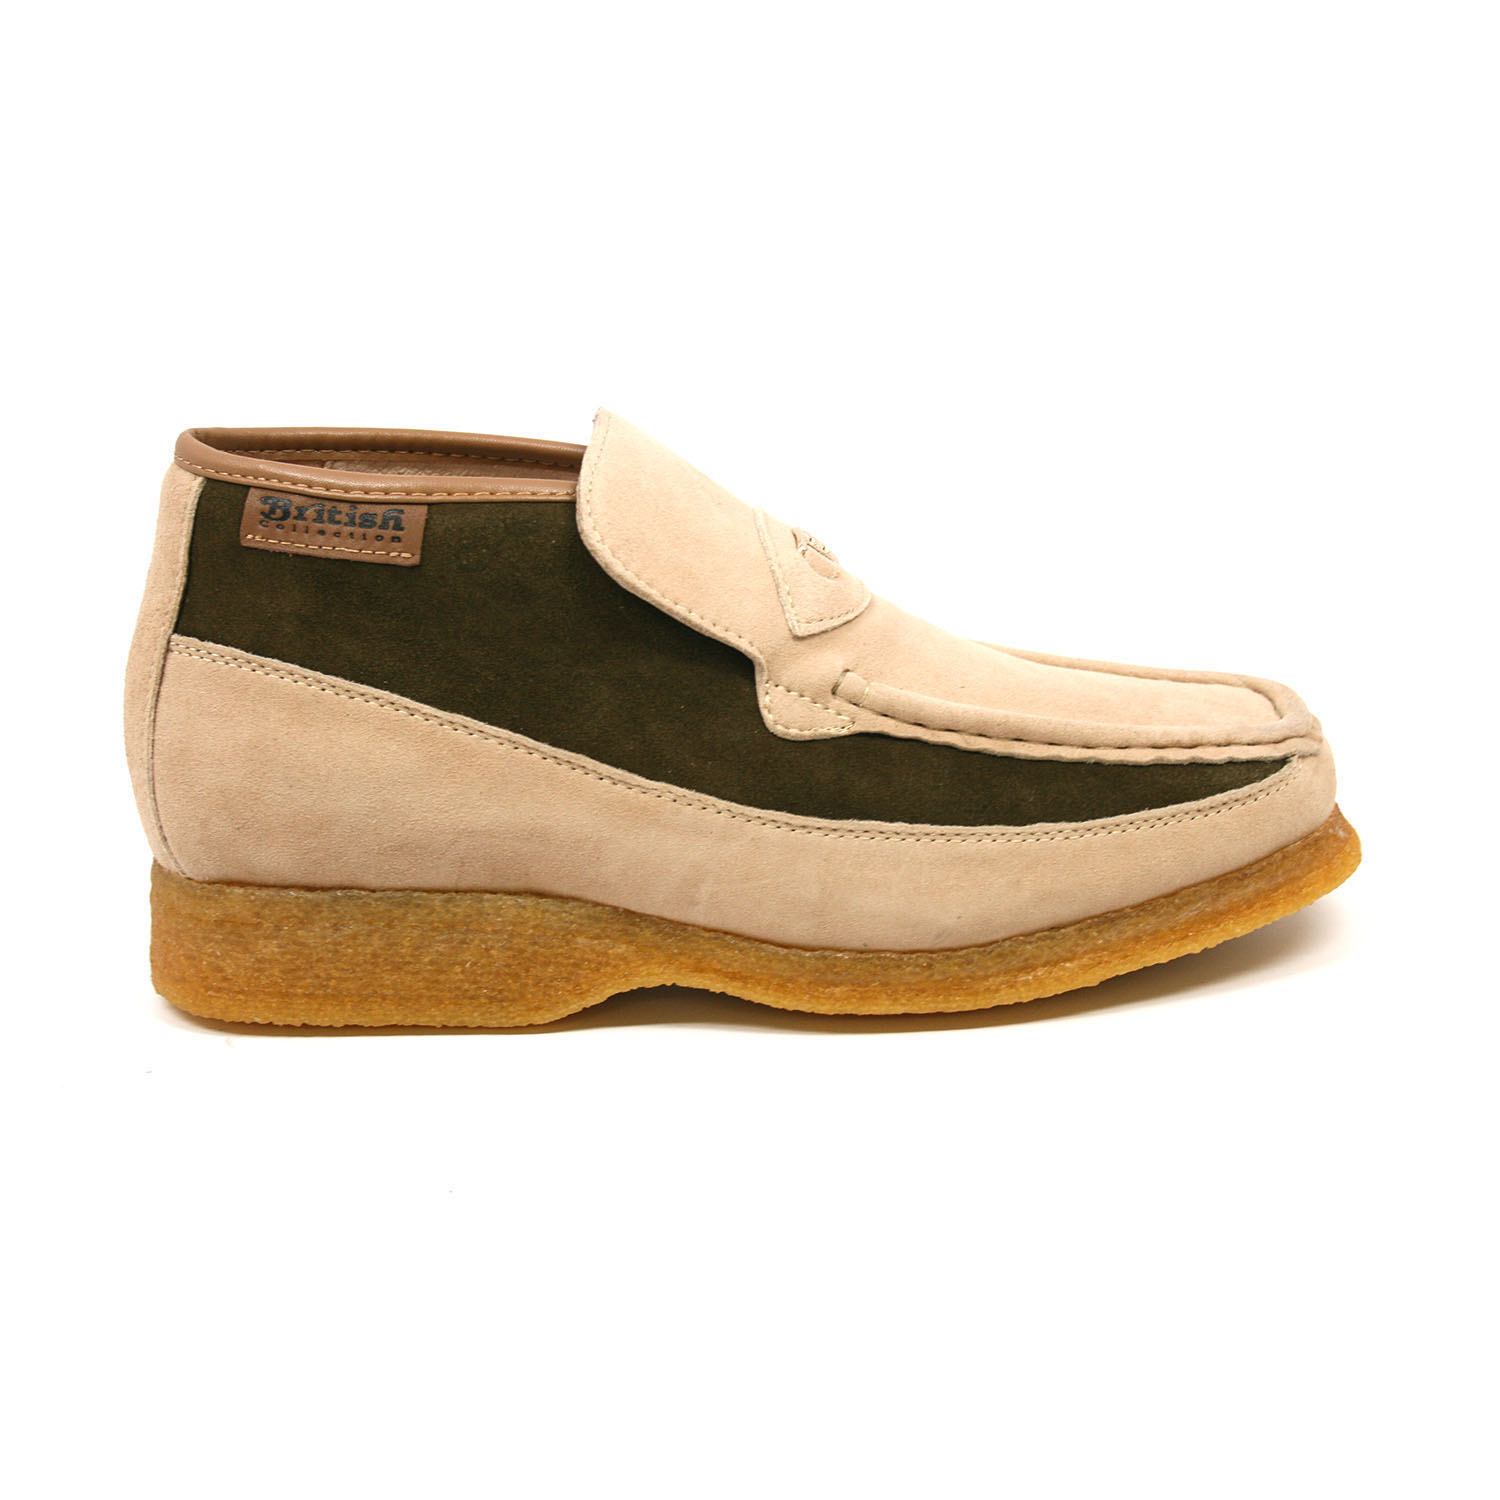 British Collection Checkers-Beige/Green Sued Slip-on [3636-9] - $99.99 ...